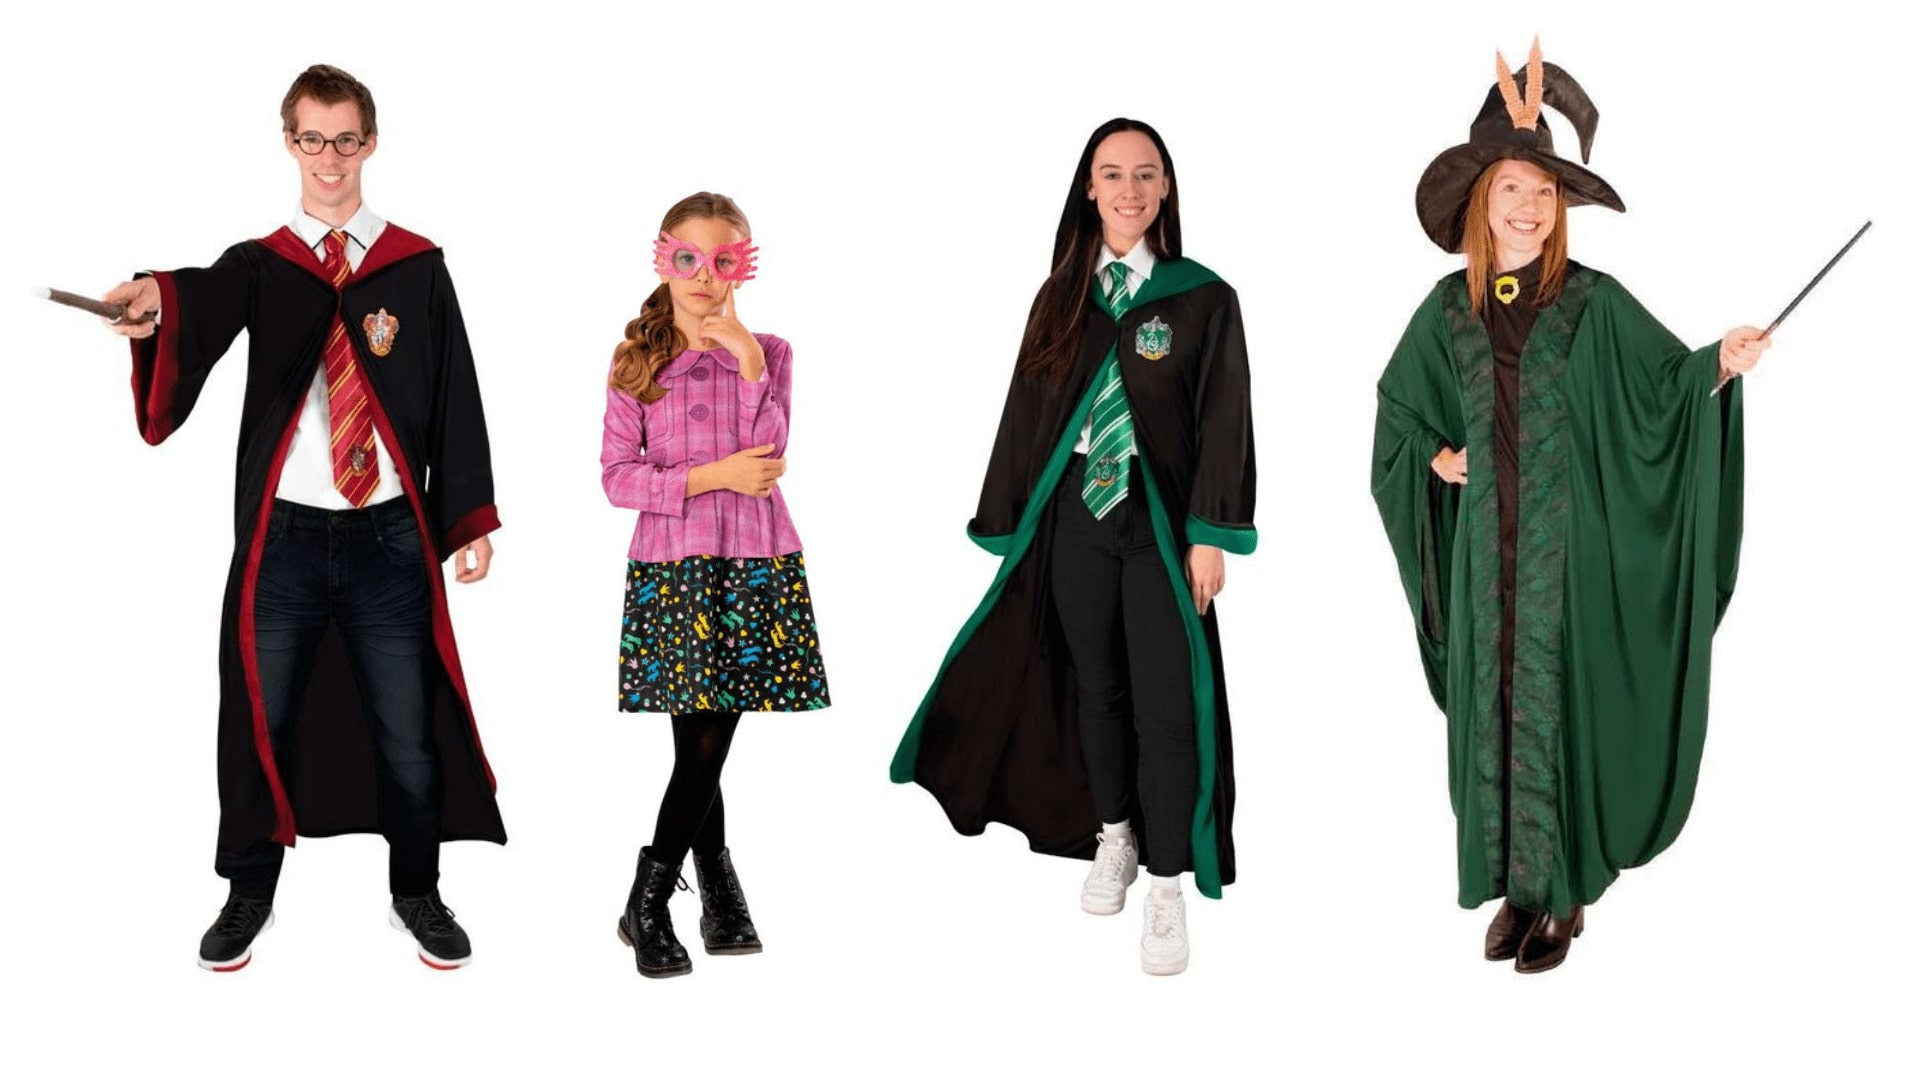 Harry Potter Character Costumes and Robes for kids and adults